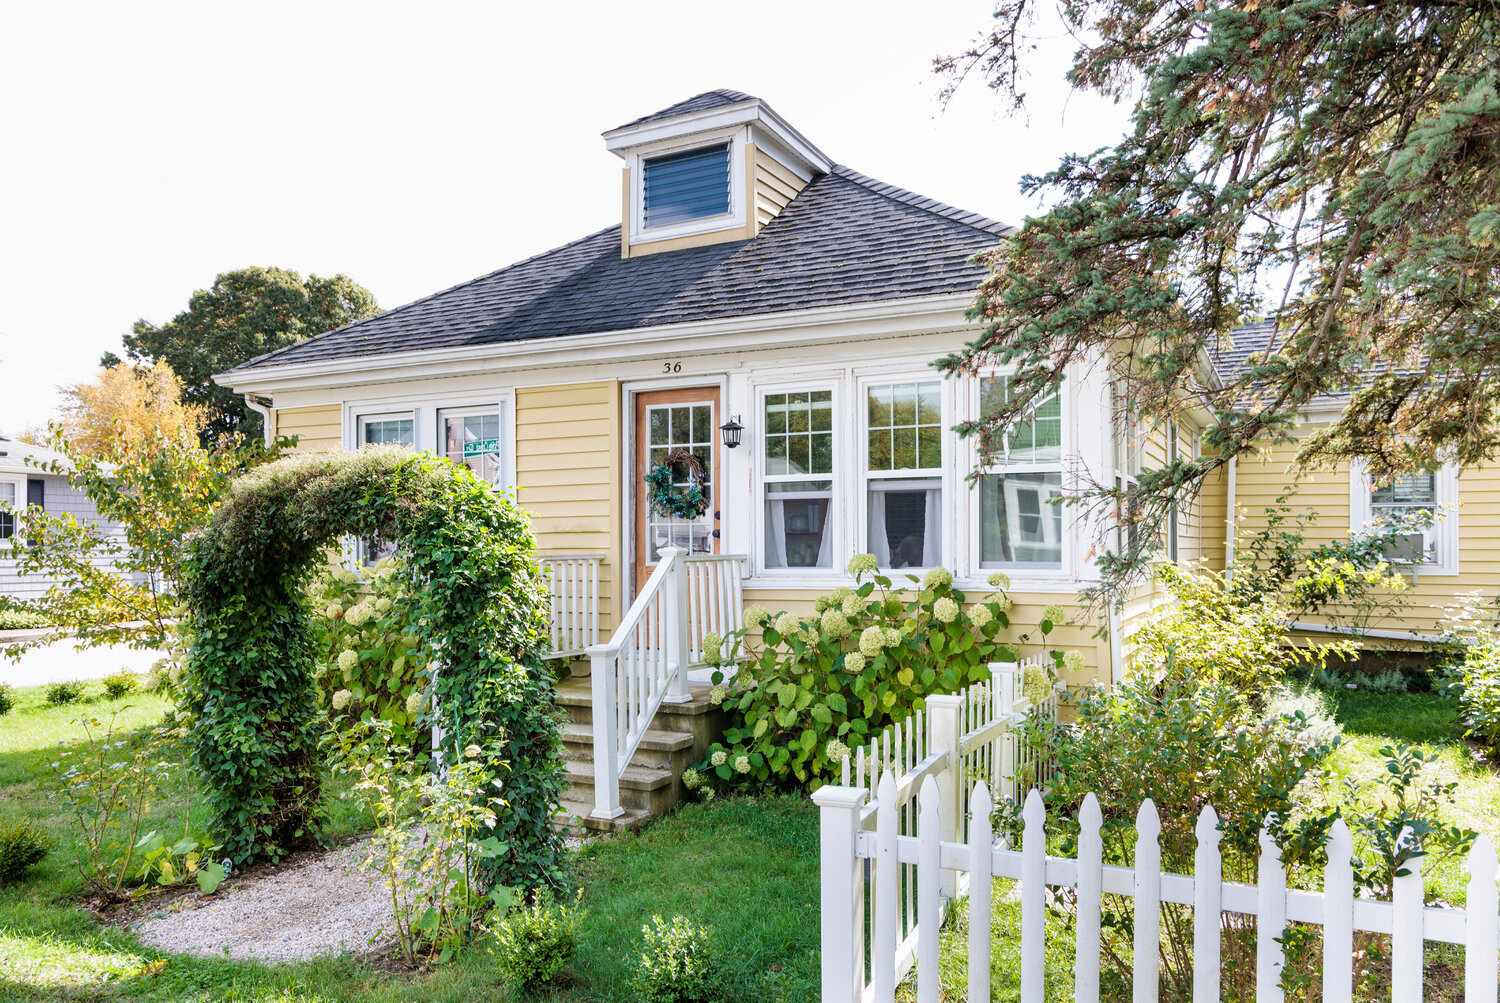 With its picket fence, vine-draped arbor, and blooming shrubs, the little 1928 cottage offers plenty of curb appeal